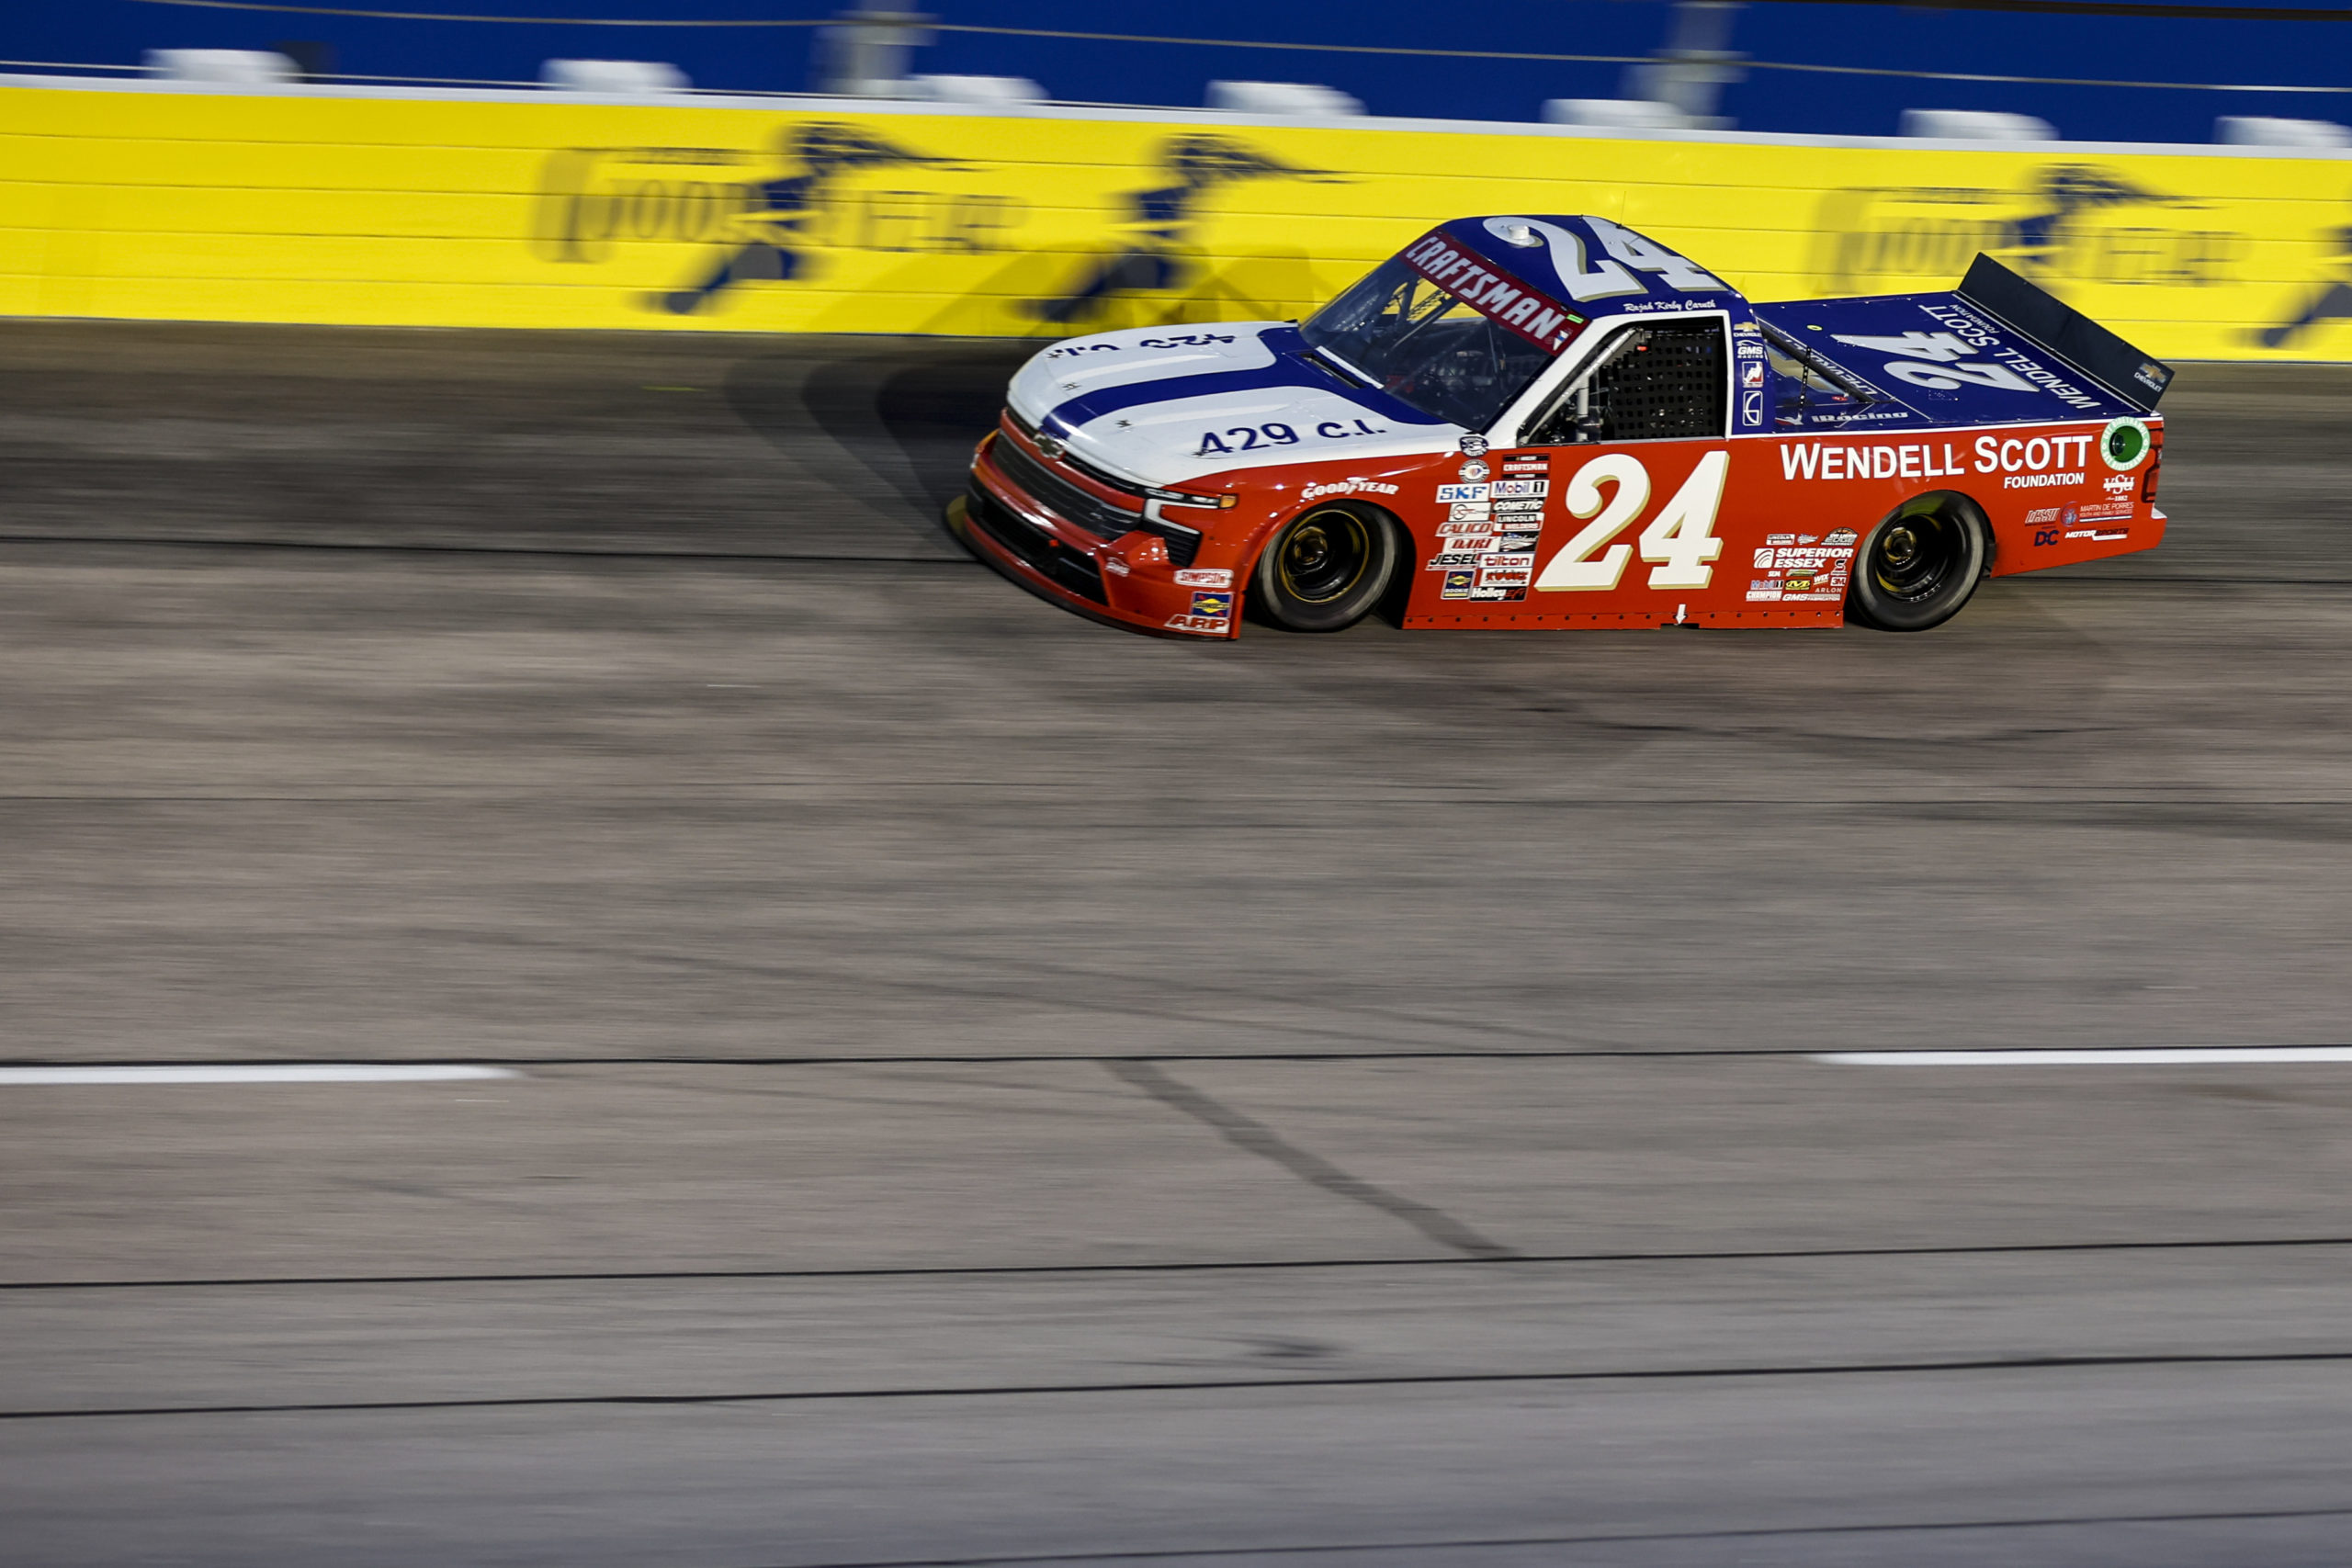 Rajah Caruth earned his first career top-10 finish in NASCAR competition in the Craftsman Truck Series at Darlington Raceway.